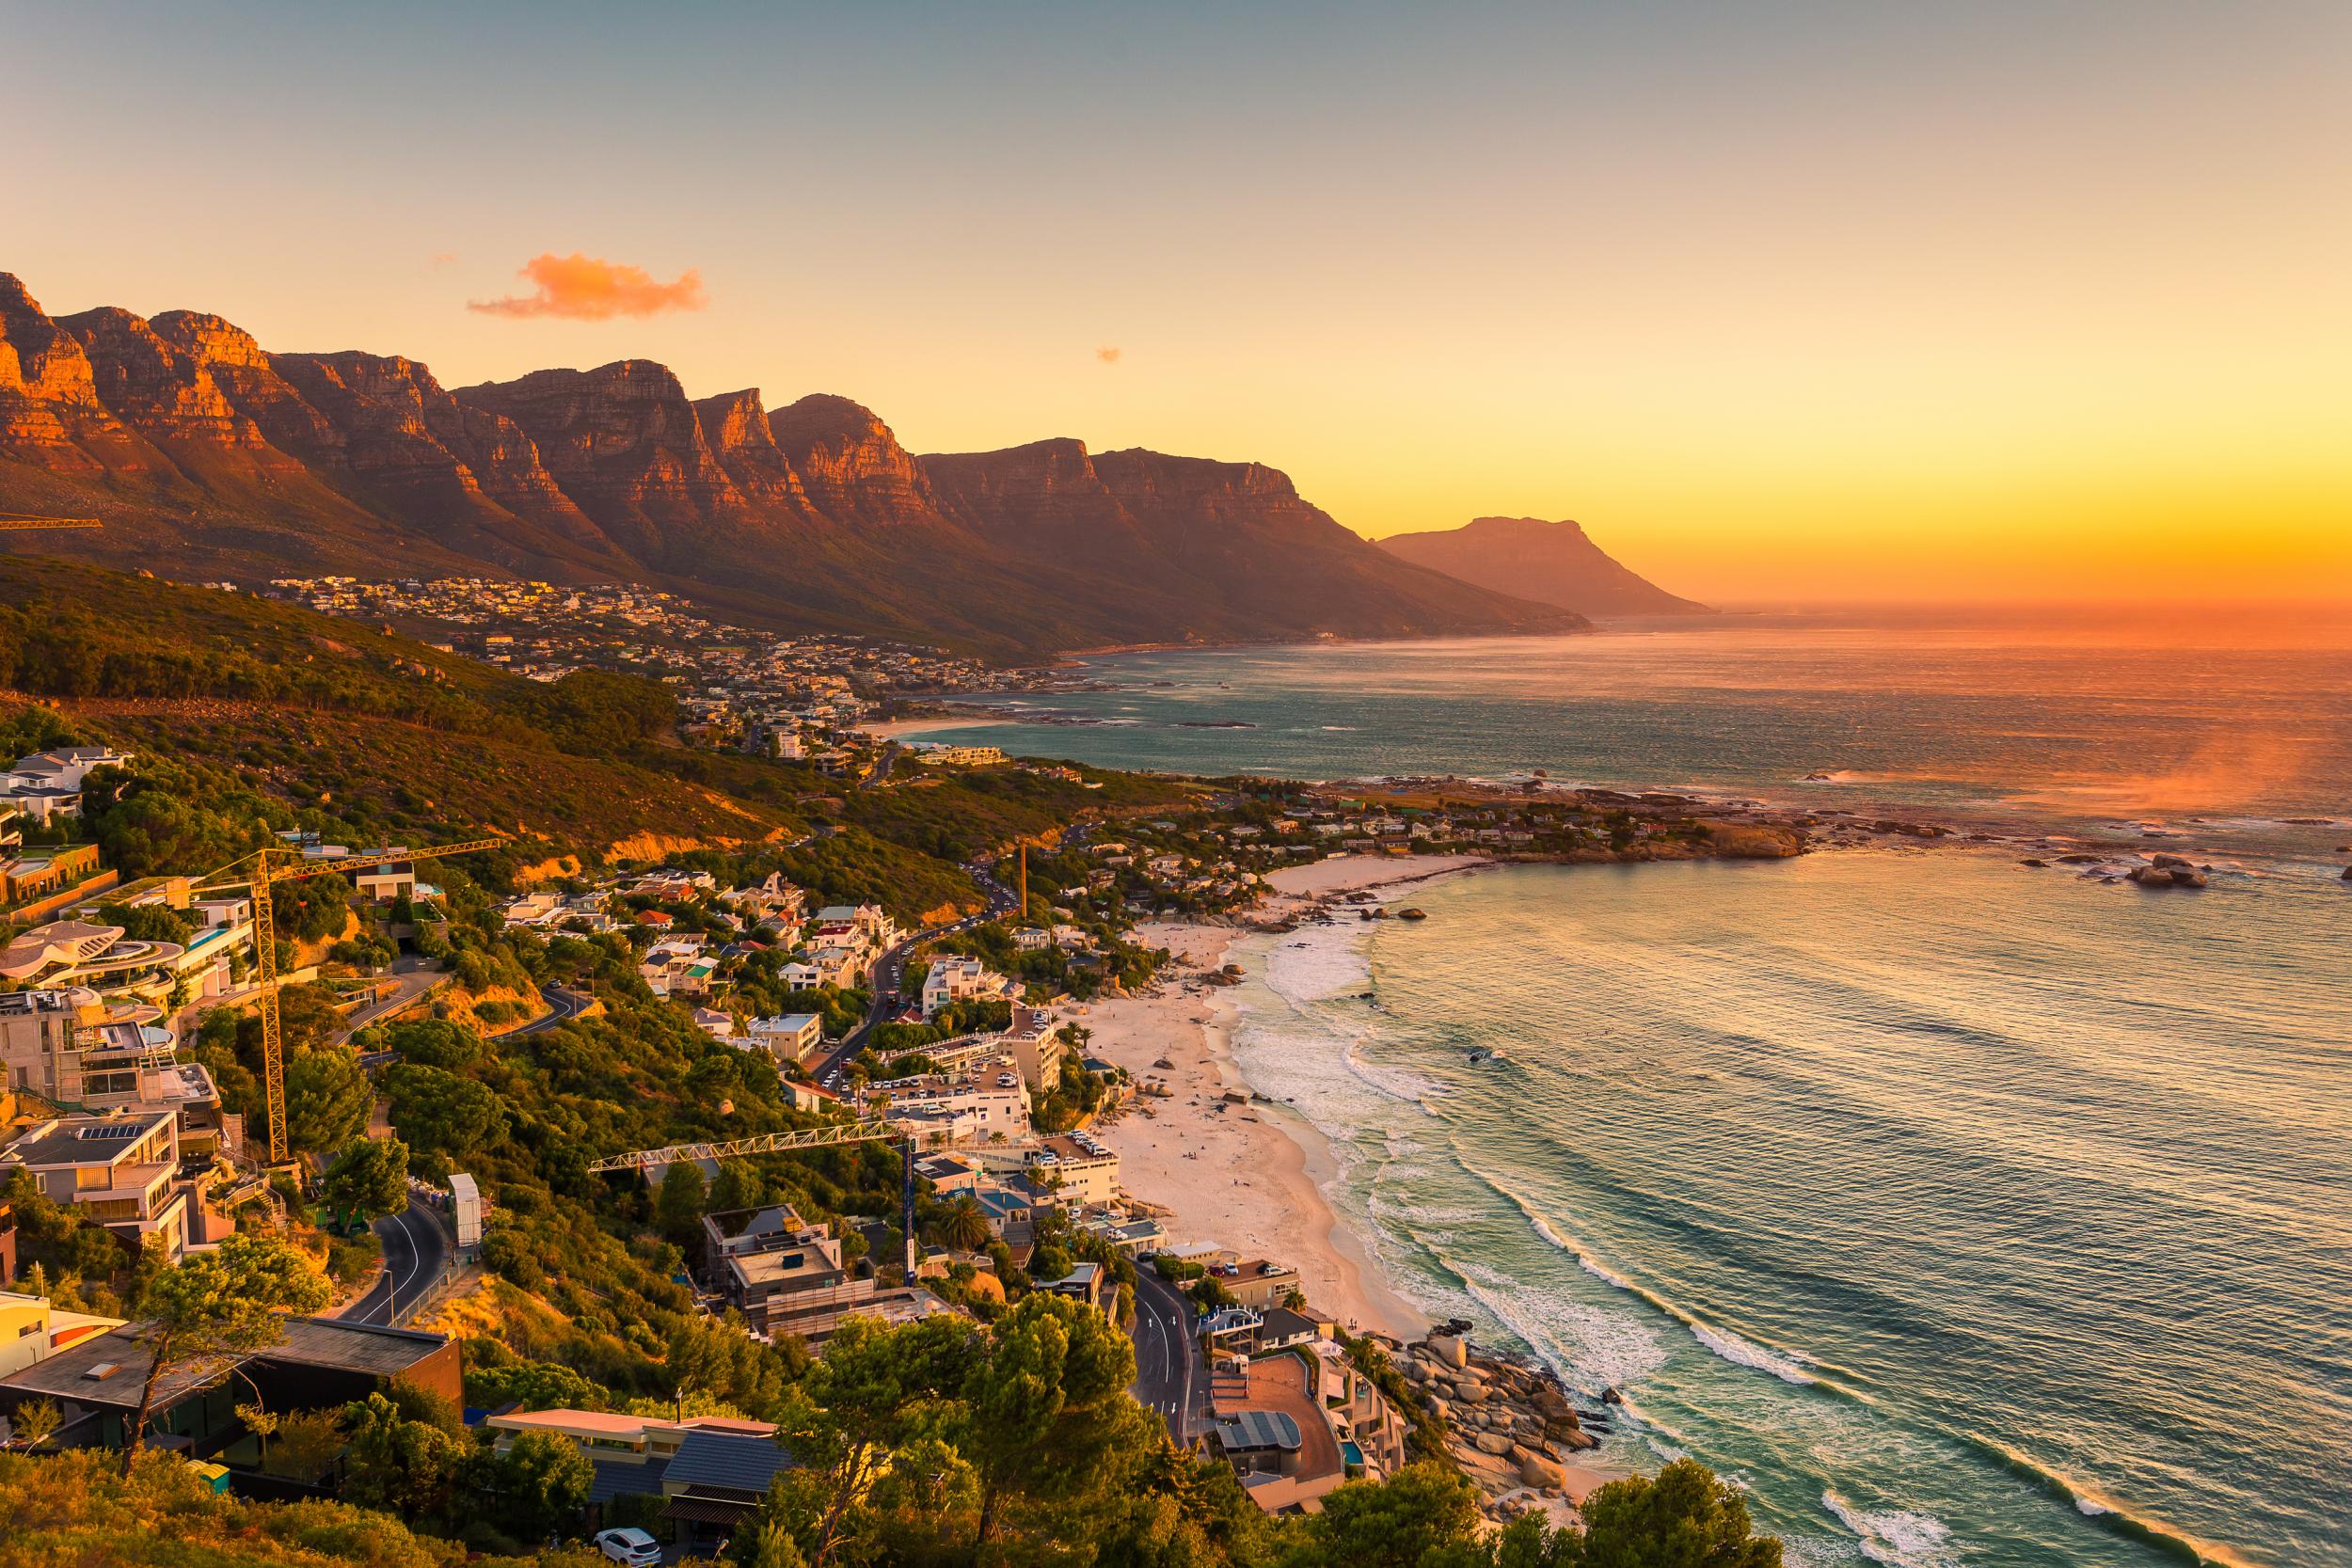 travel agents in cape town south africa